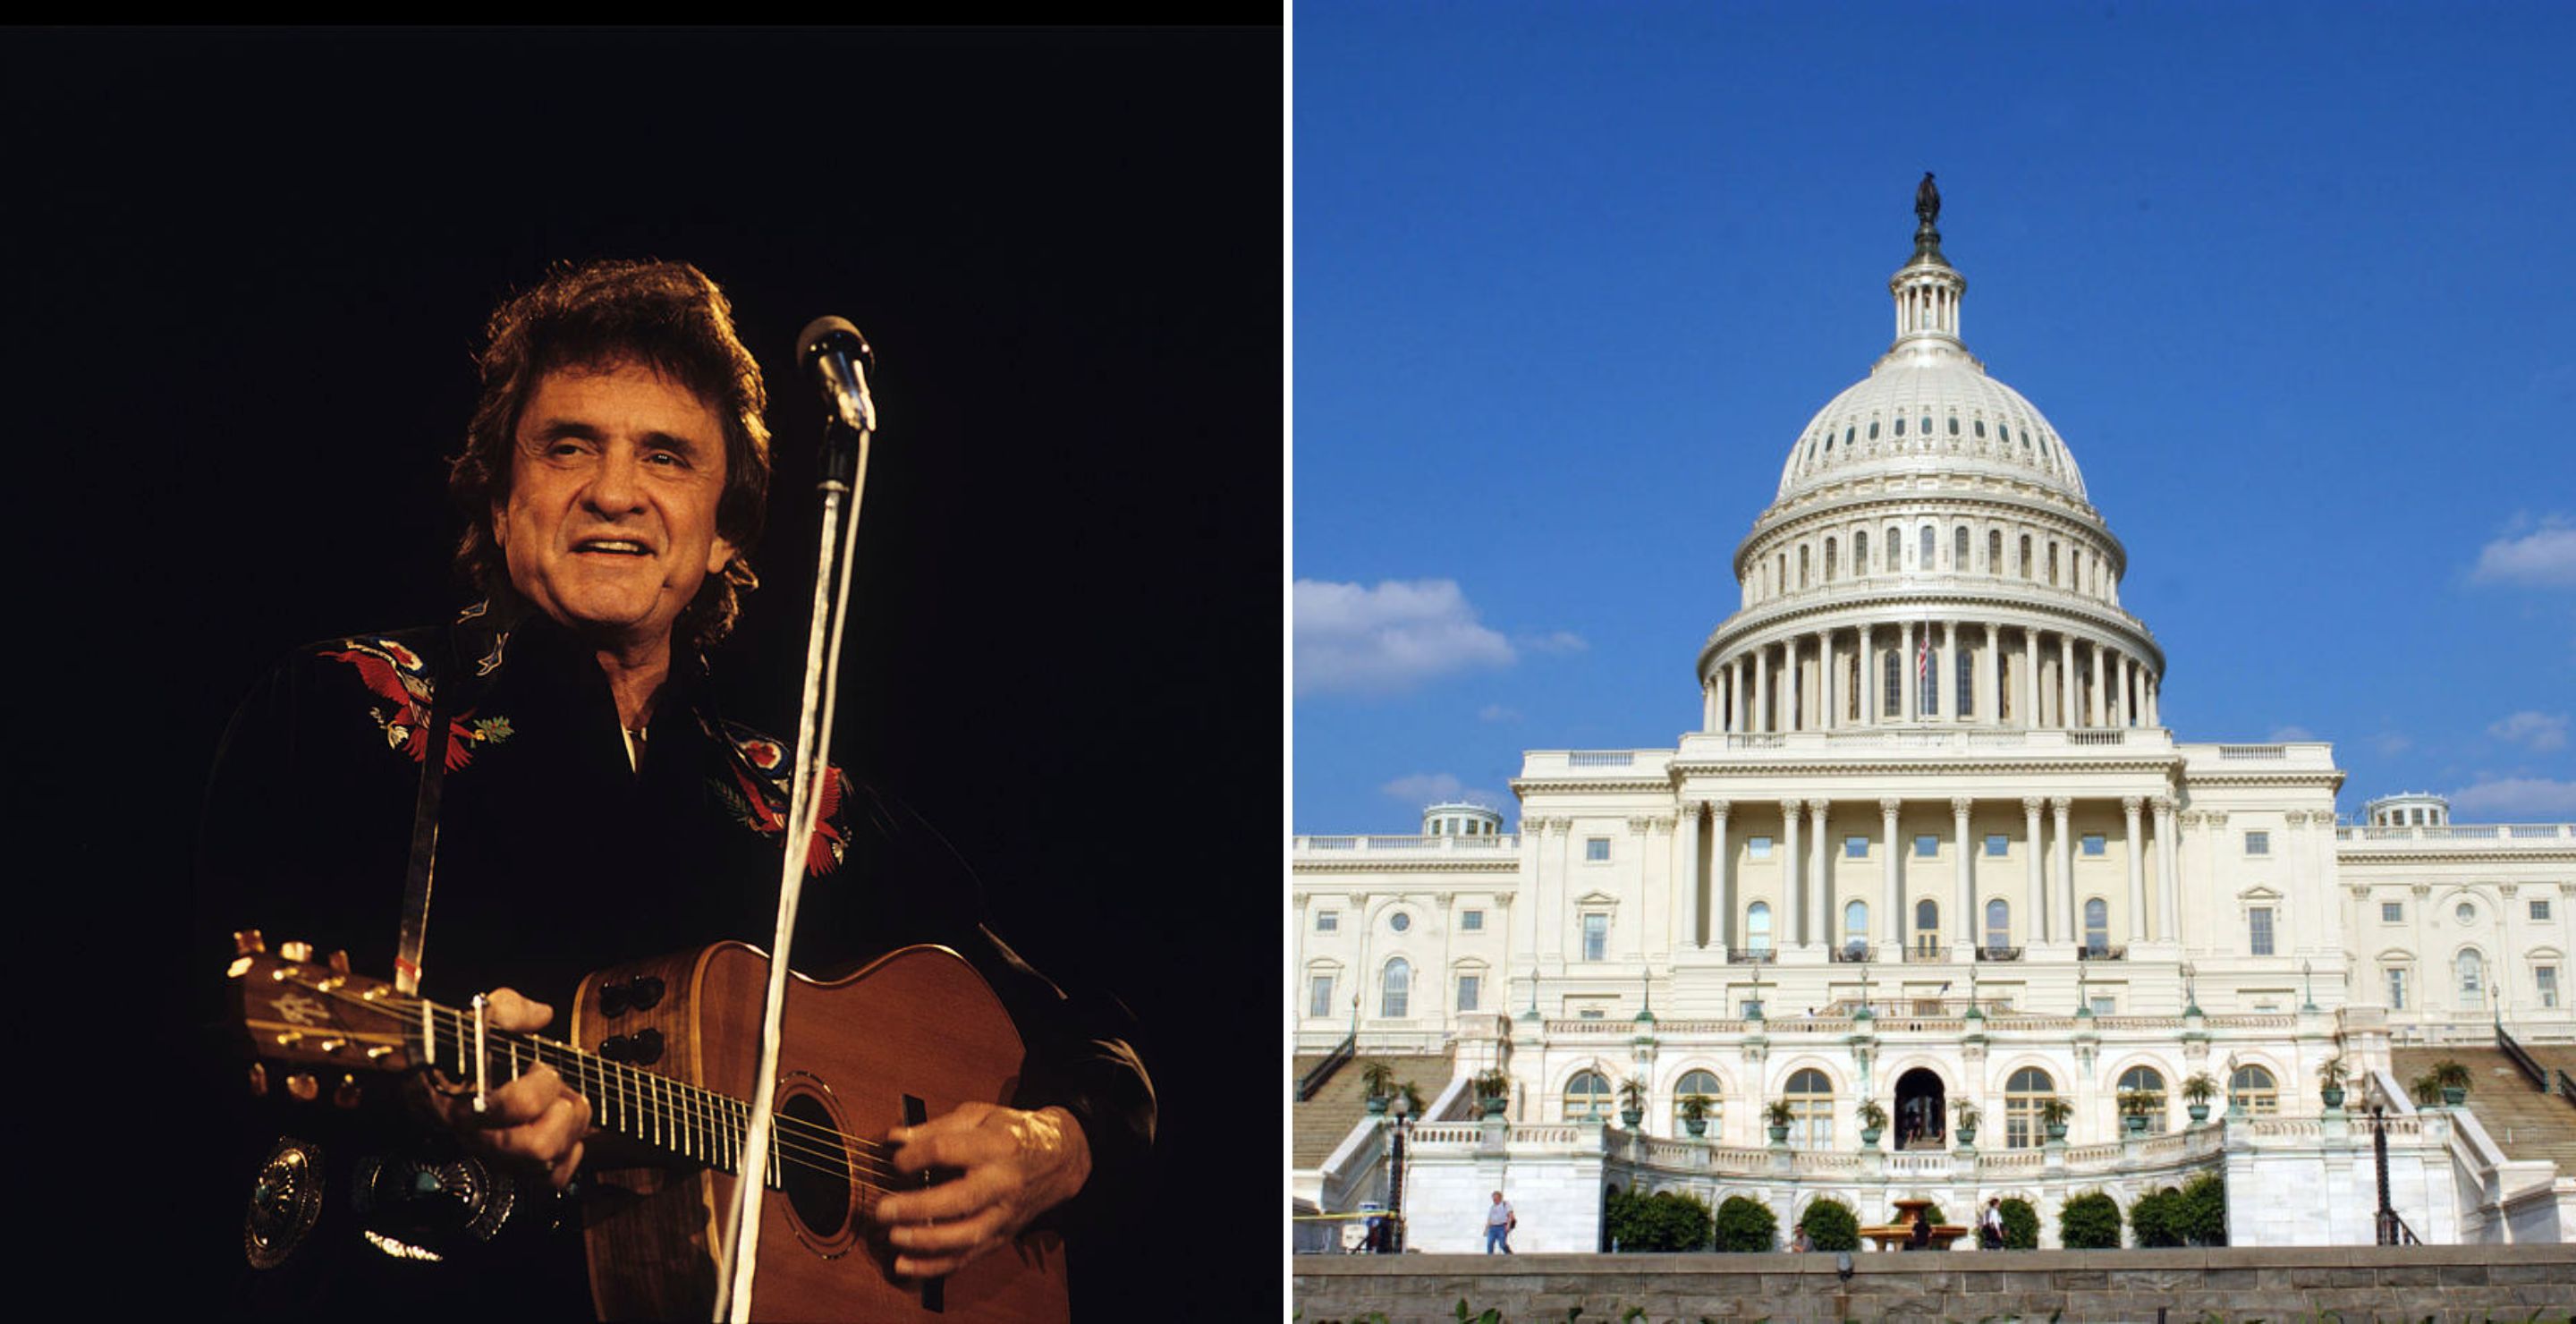 Johnny Cash's Home State Will Honor His Lasting Legacy And Contribution To Music